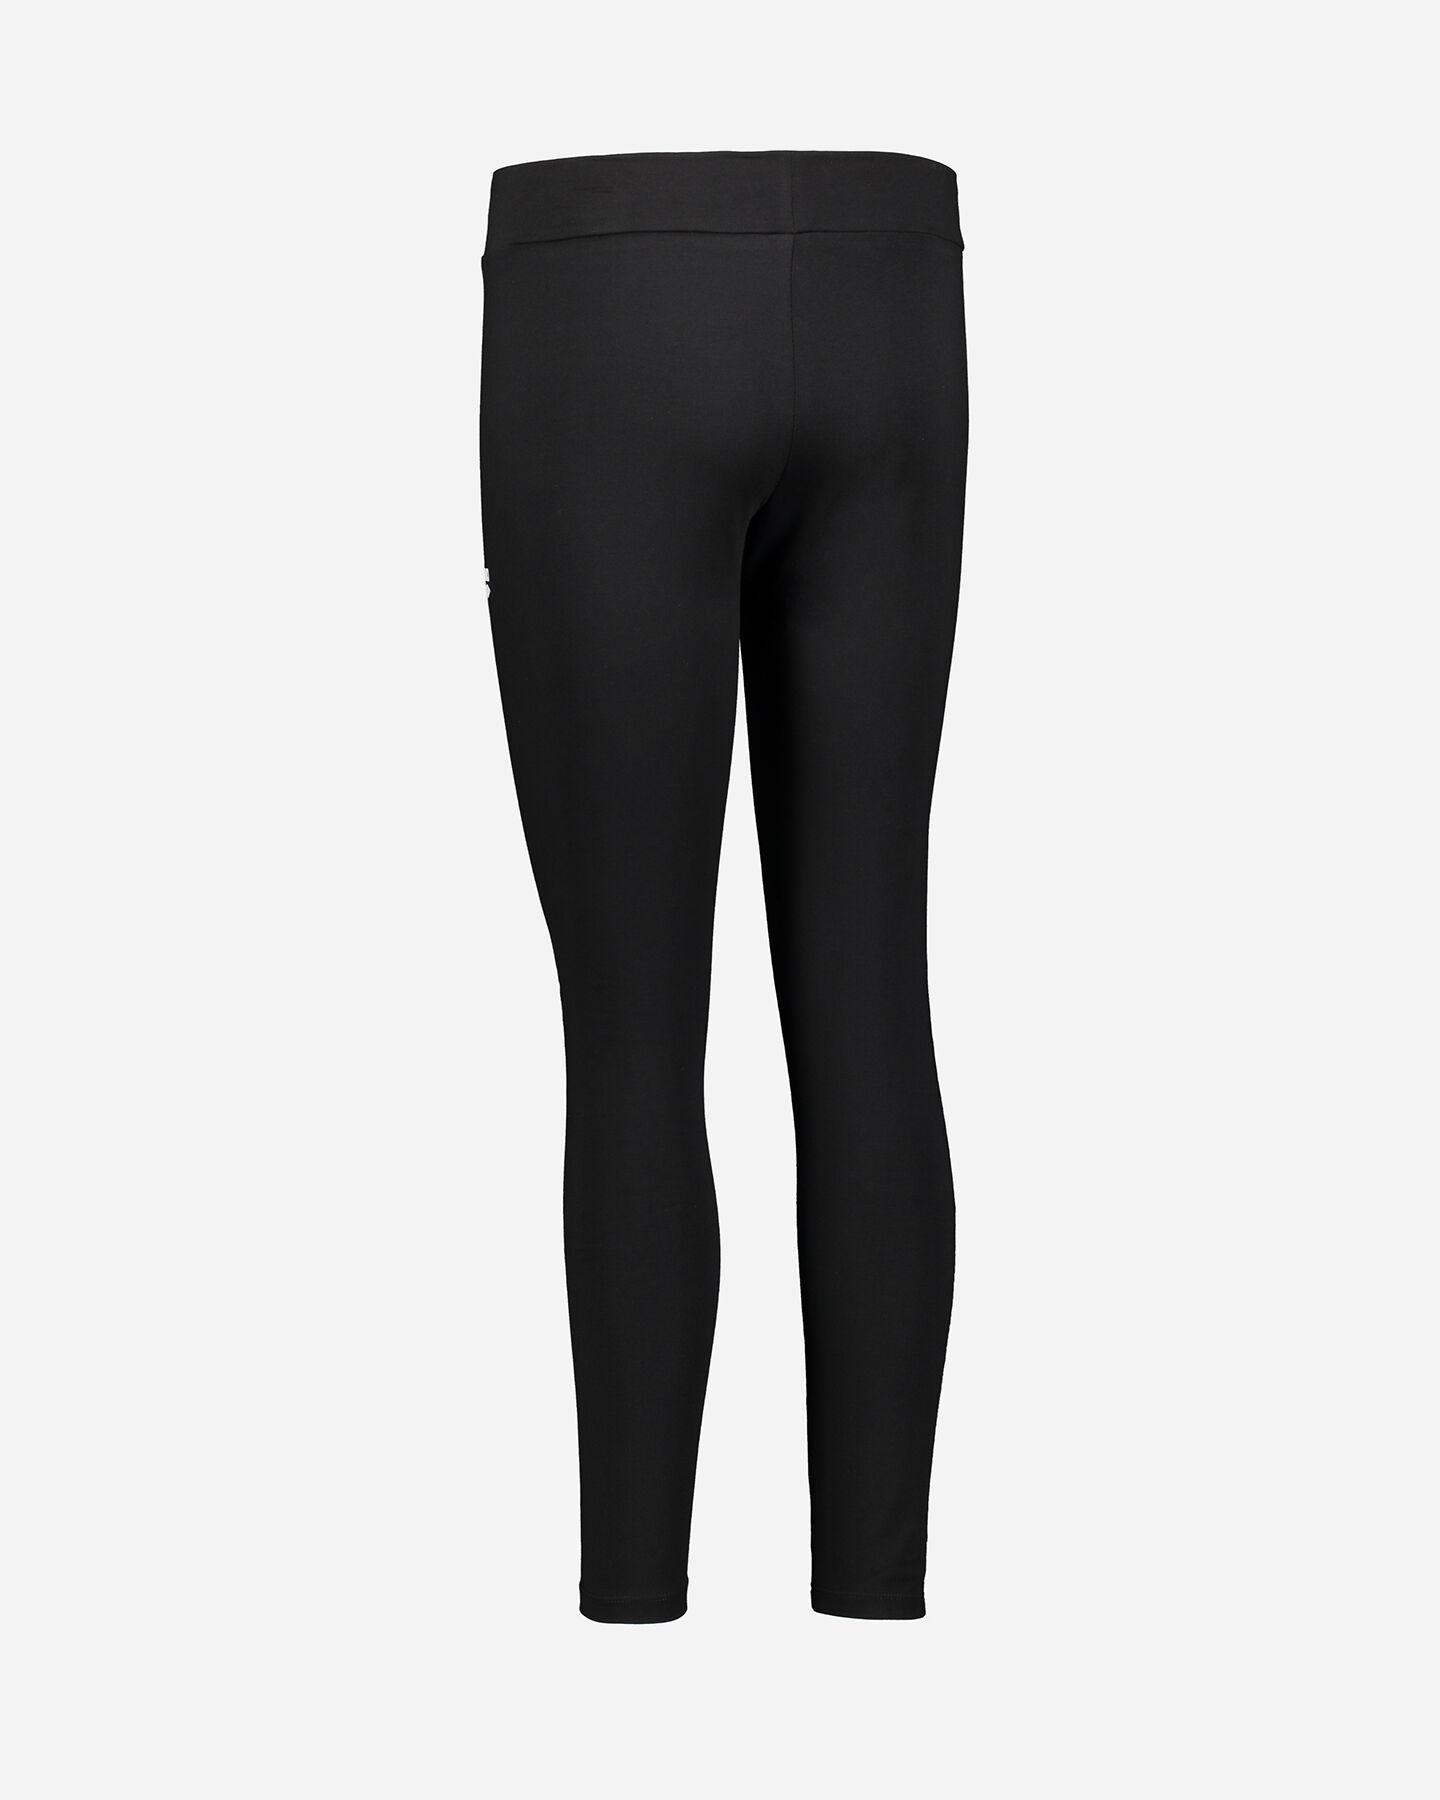  Leggings ARENA JSTRETCH INSERT MESH W S4087515|050|XS scatto 2